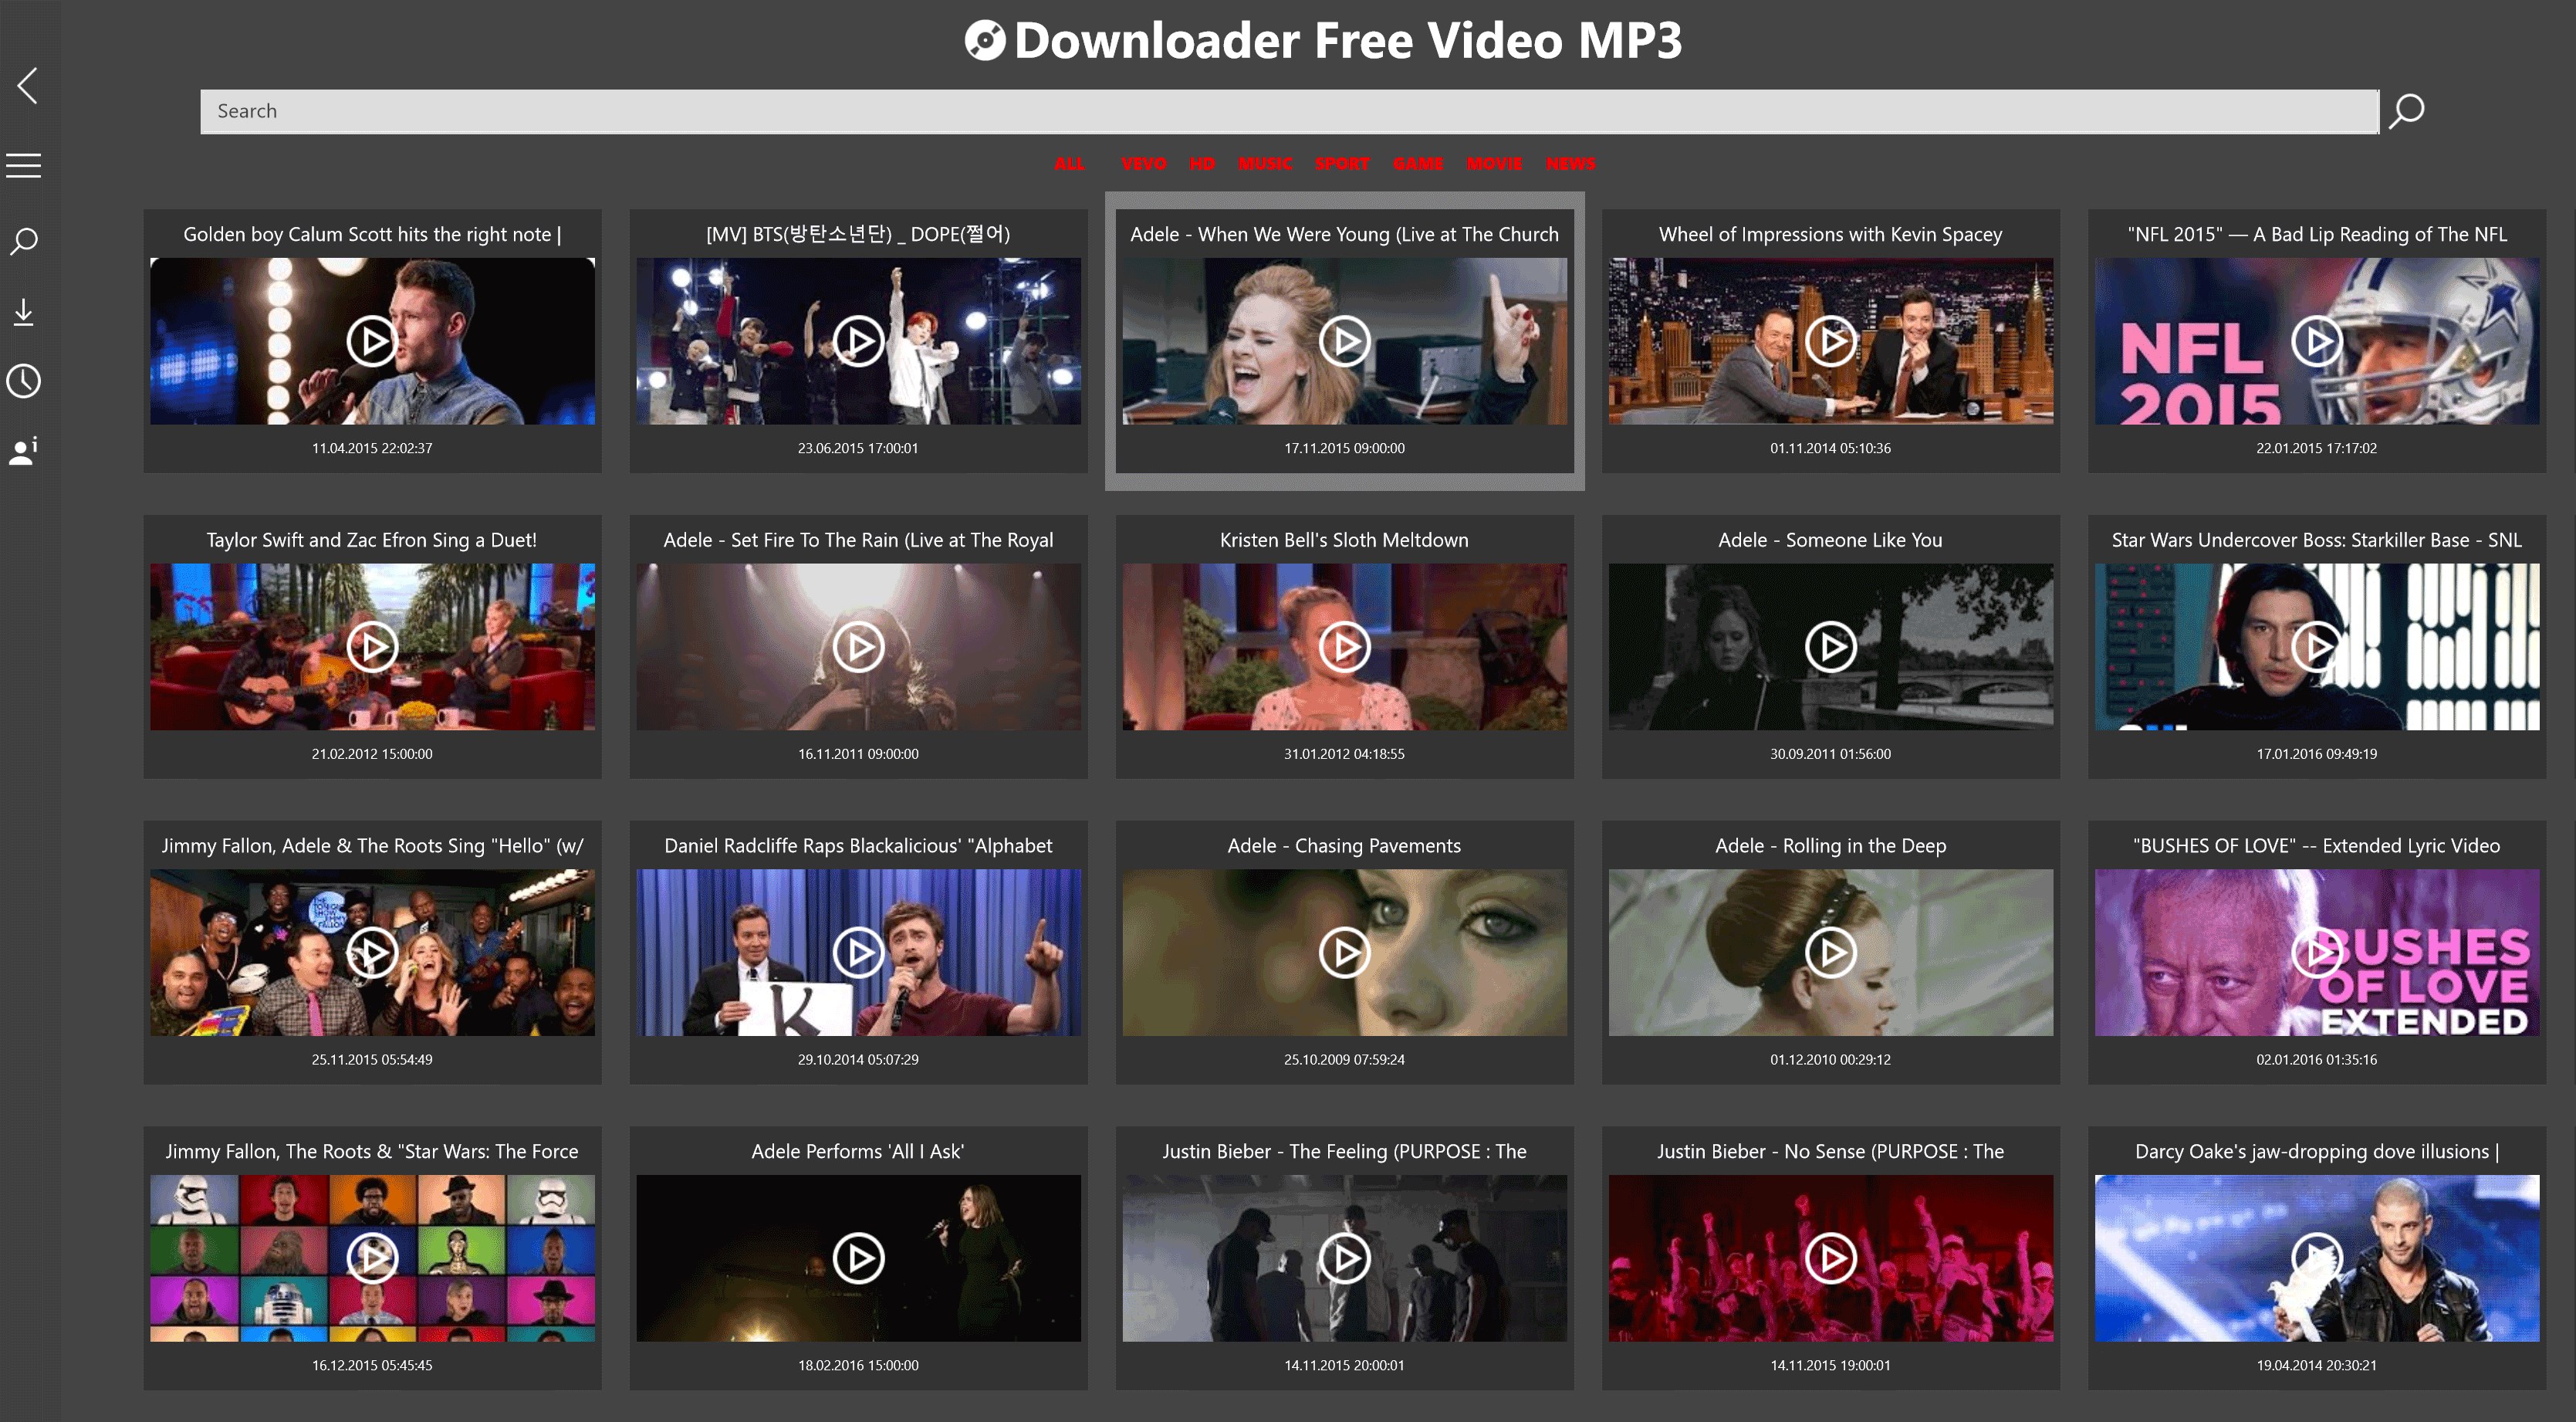 music video download free mp3